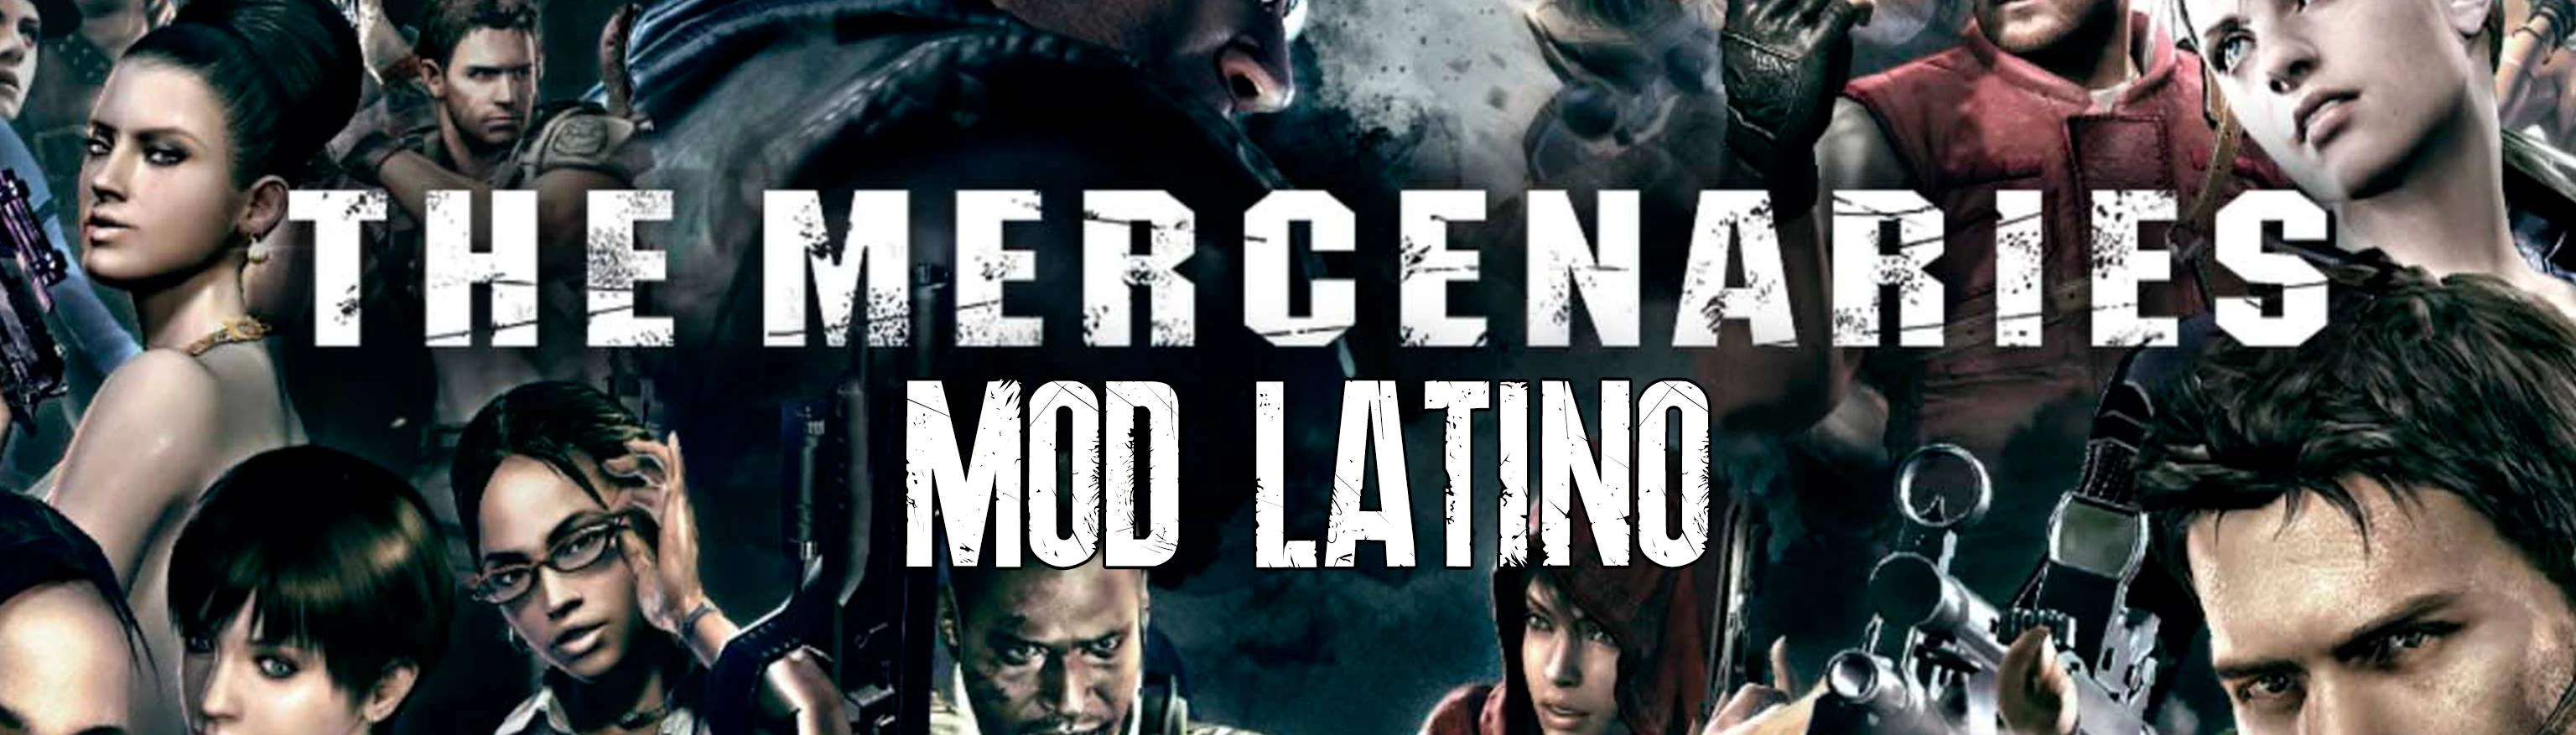 Resident Evil 5 - Mod Extreme Condition Remaker #26 / Modo Impossivel  Infernal Krauser Solo - BR 